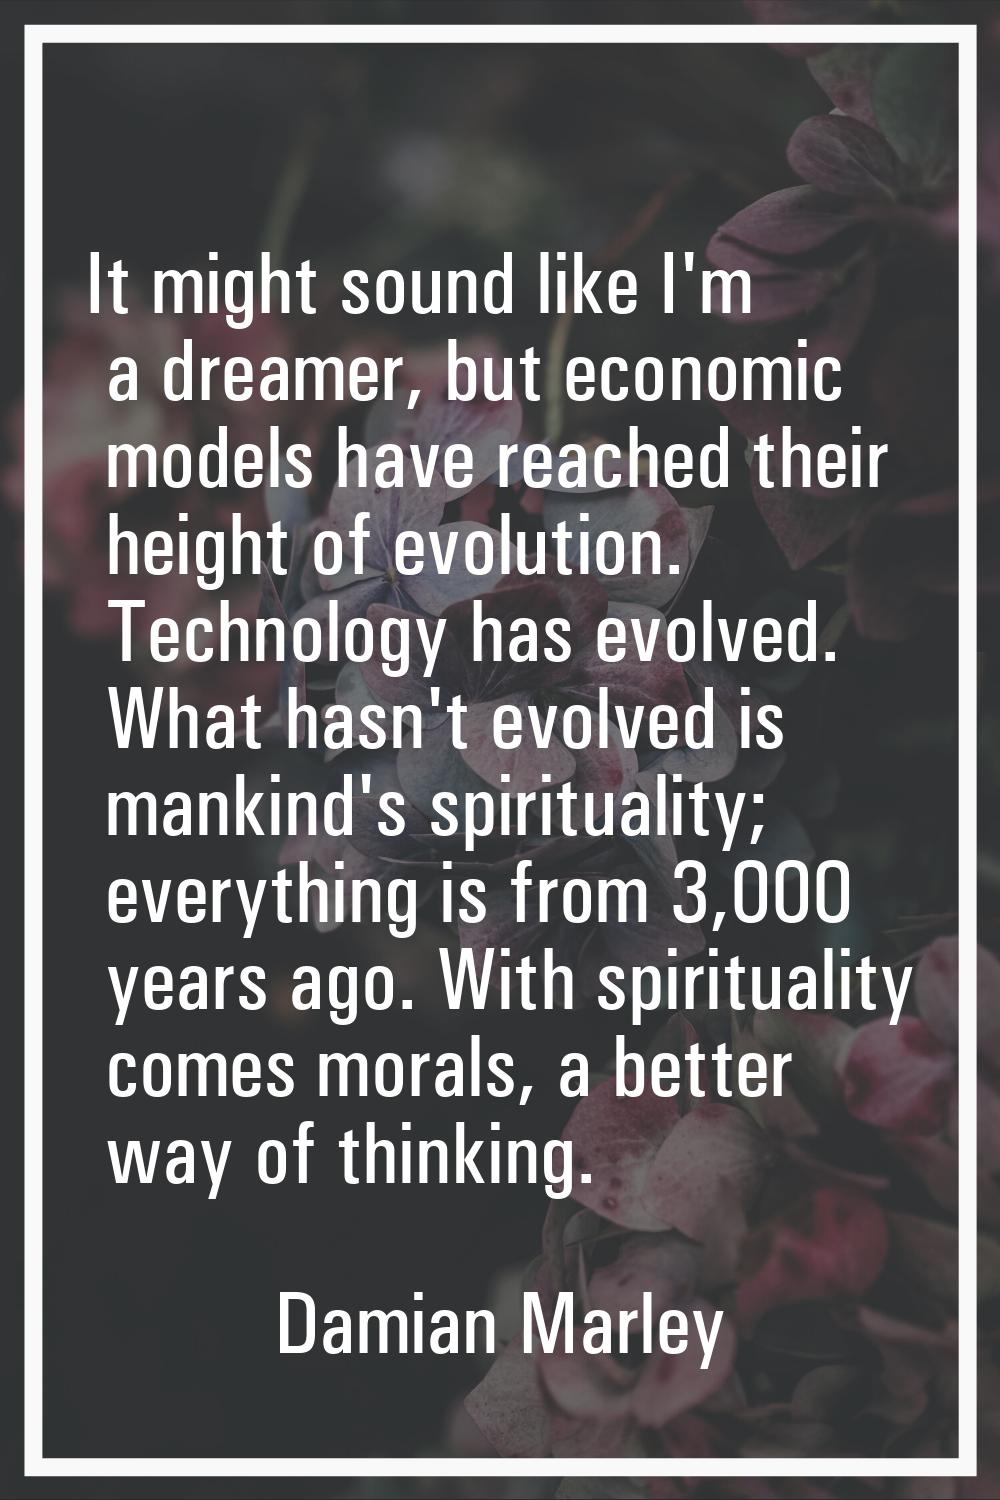 It might sound like I'm a dreamer, but economic models have reached their height of evolution. Tech